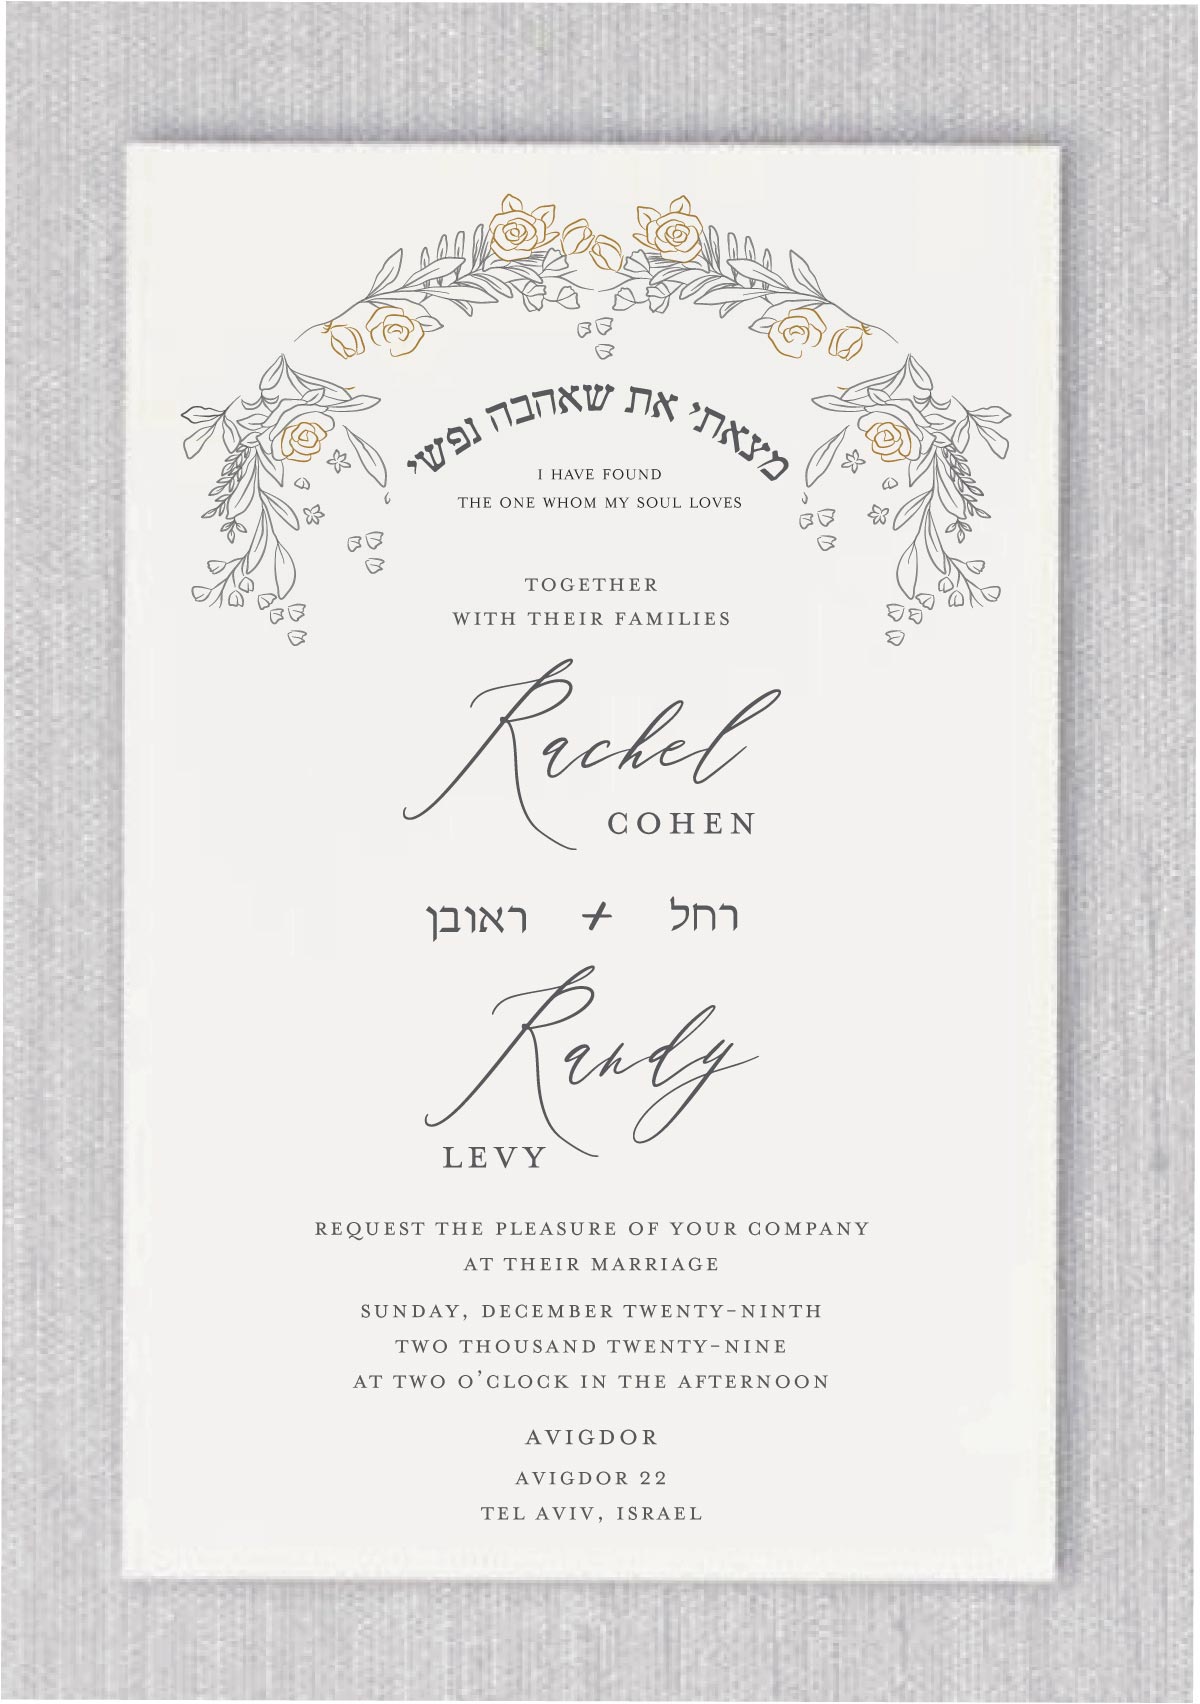 Gold Roses Arch – Jewish Wedding Invitation is a perfect blend of modernity and tradition. The invitation features beautifully hand-drawn leaves and roses adorning this wedding invitation. The text “I am my beloved and my beloved is mine” is arch designed in Hebrew, showcasing the essence of a Jewish wedding. The unique gold roses arch effect used in the design adds a touch of artistic flair, giving the invitation a refreshing and contemporary feel. The layout of the invitation is modern and clean, making it easy to read and understand all the important details of your special day. With this invitation, you can invite your guests to your wedding in style, and let them know that they are in for a beautiful and unforgettable celebration.